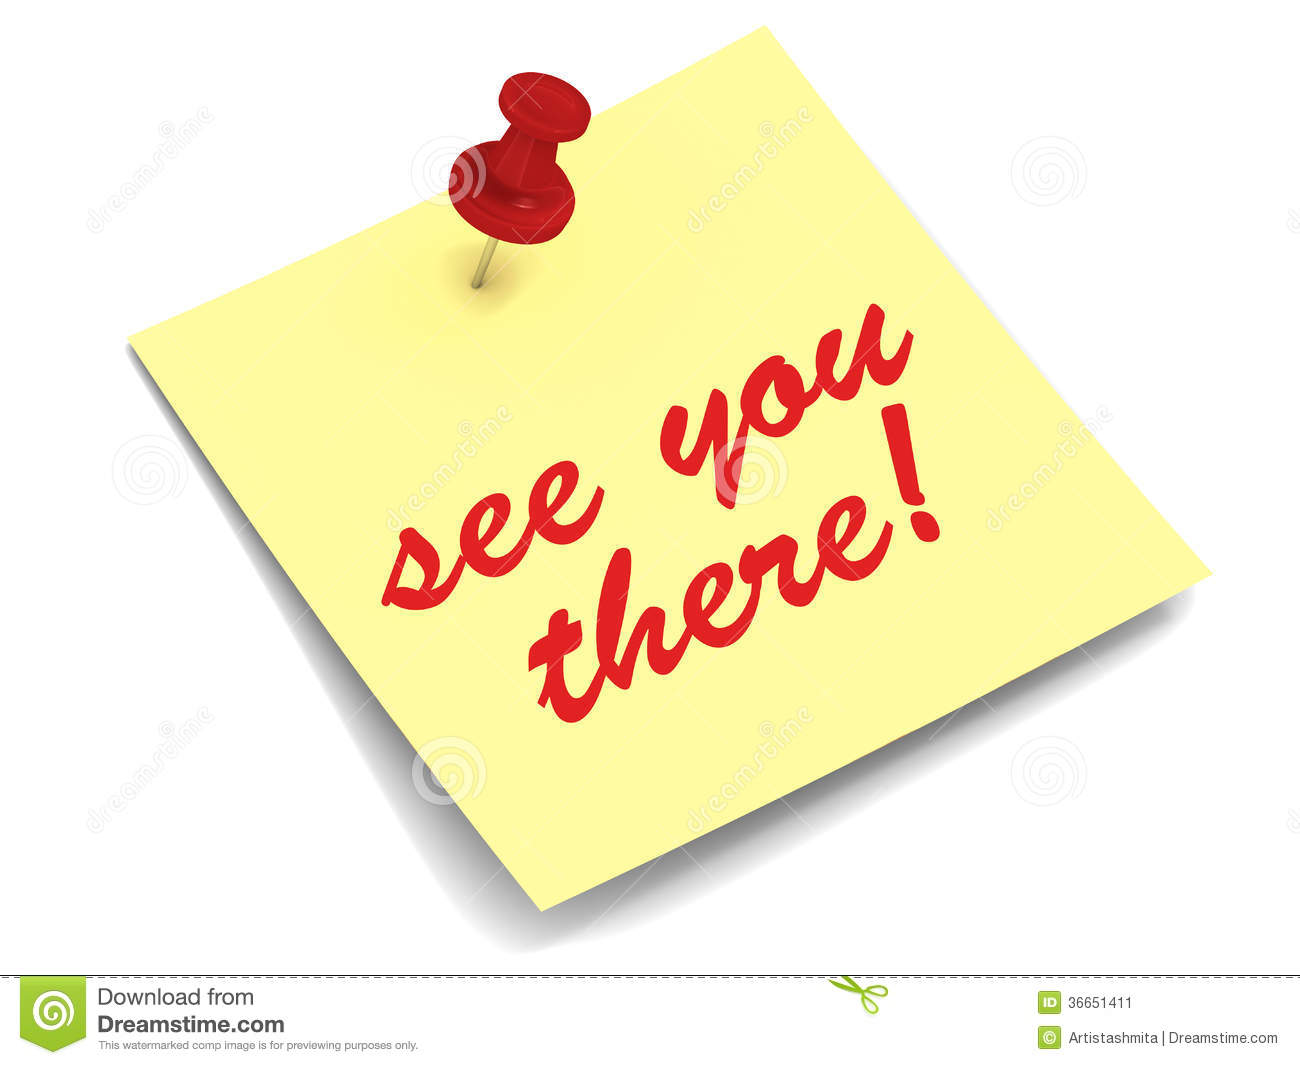 See You There Sticky Note Pinned On White Background 